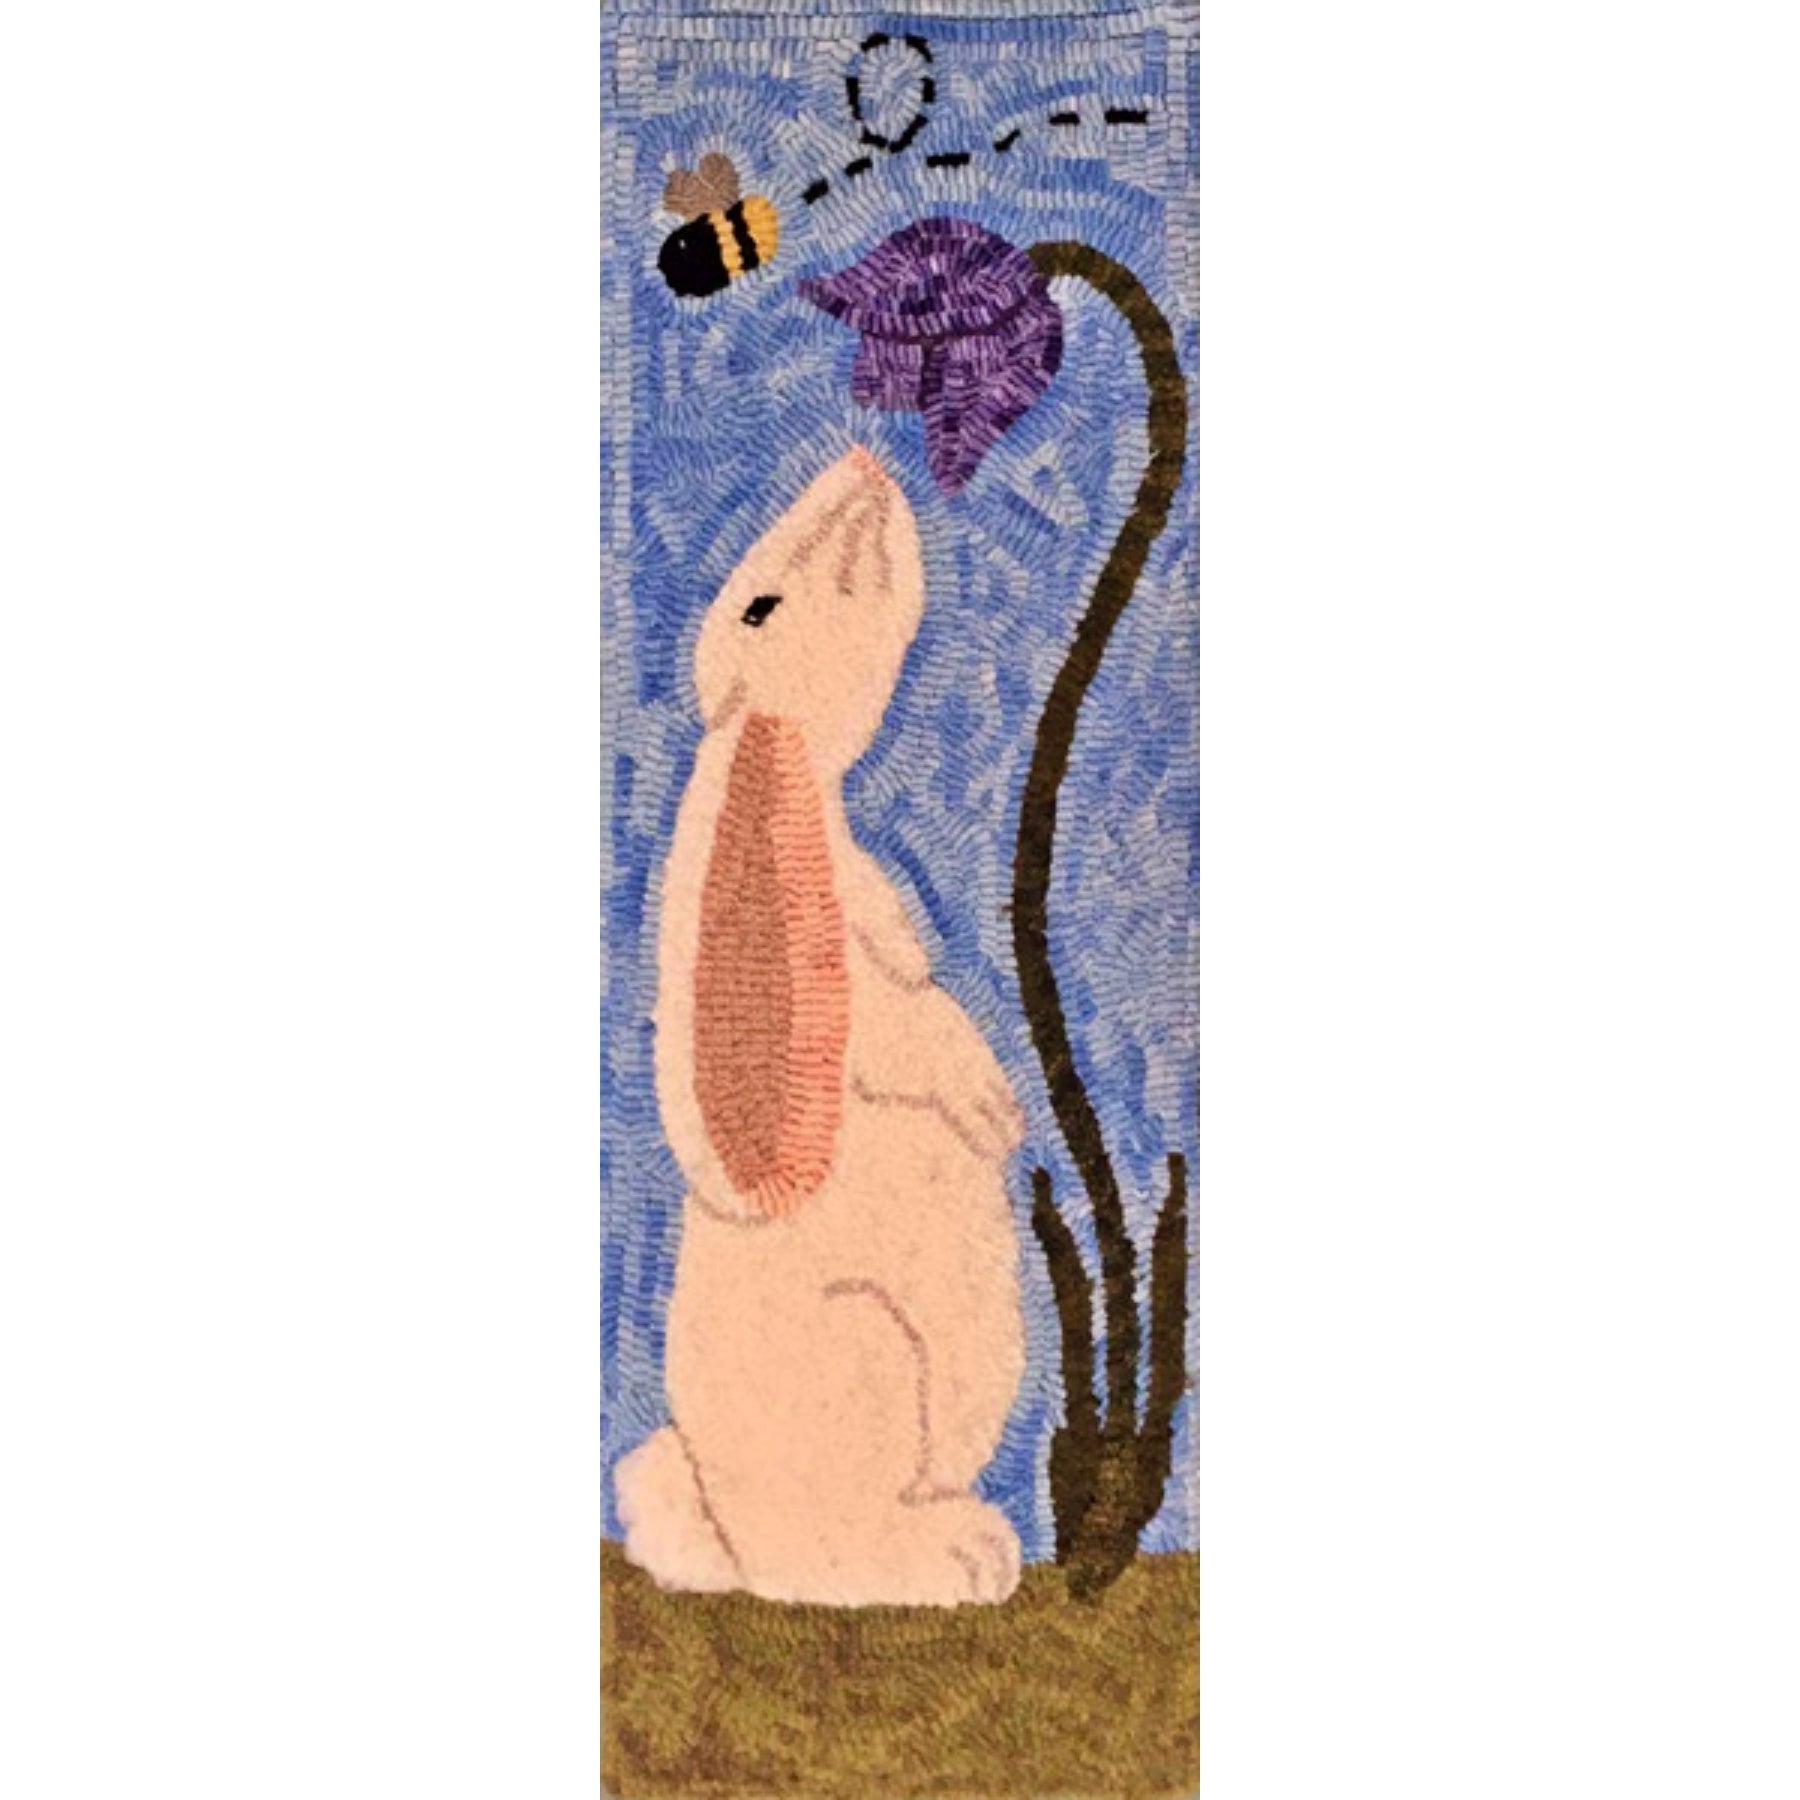 Sunny Bunny with Tulip, rug hooked by Paula Buchanan Russell